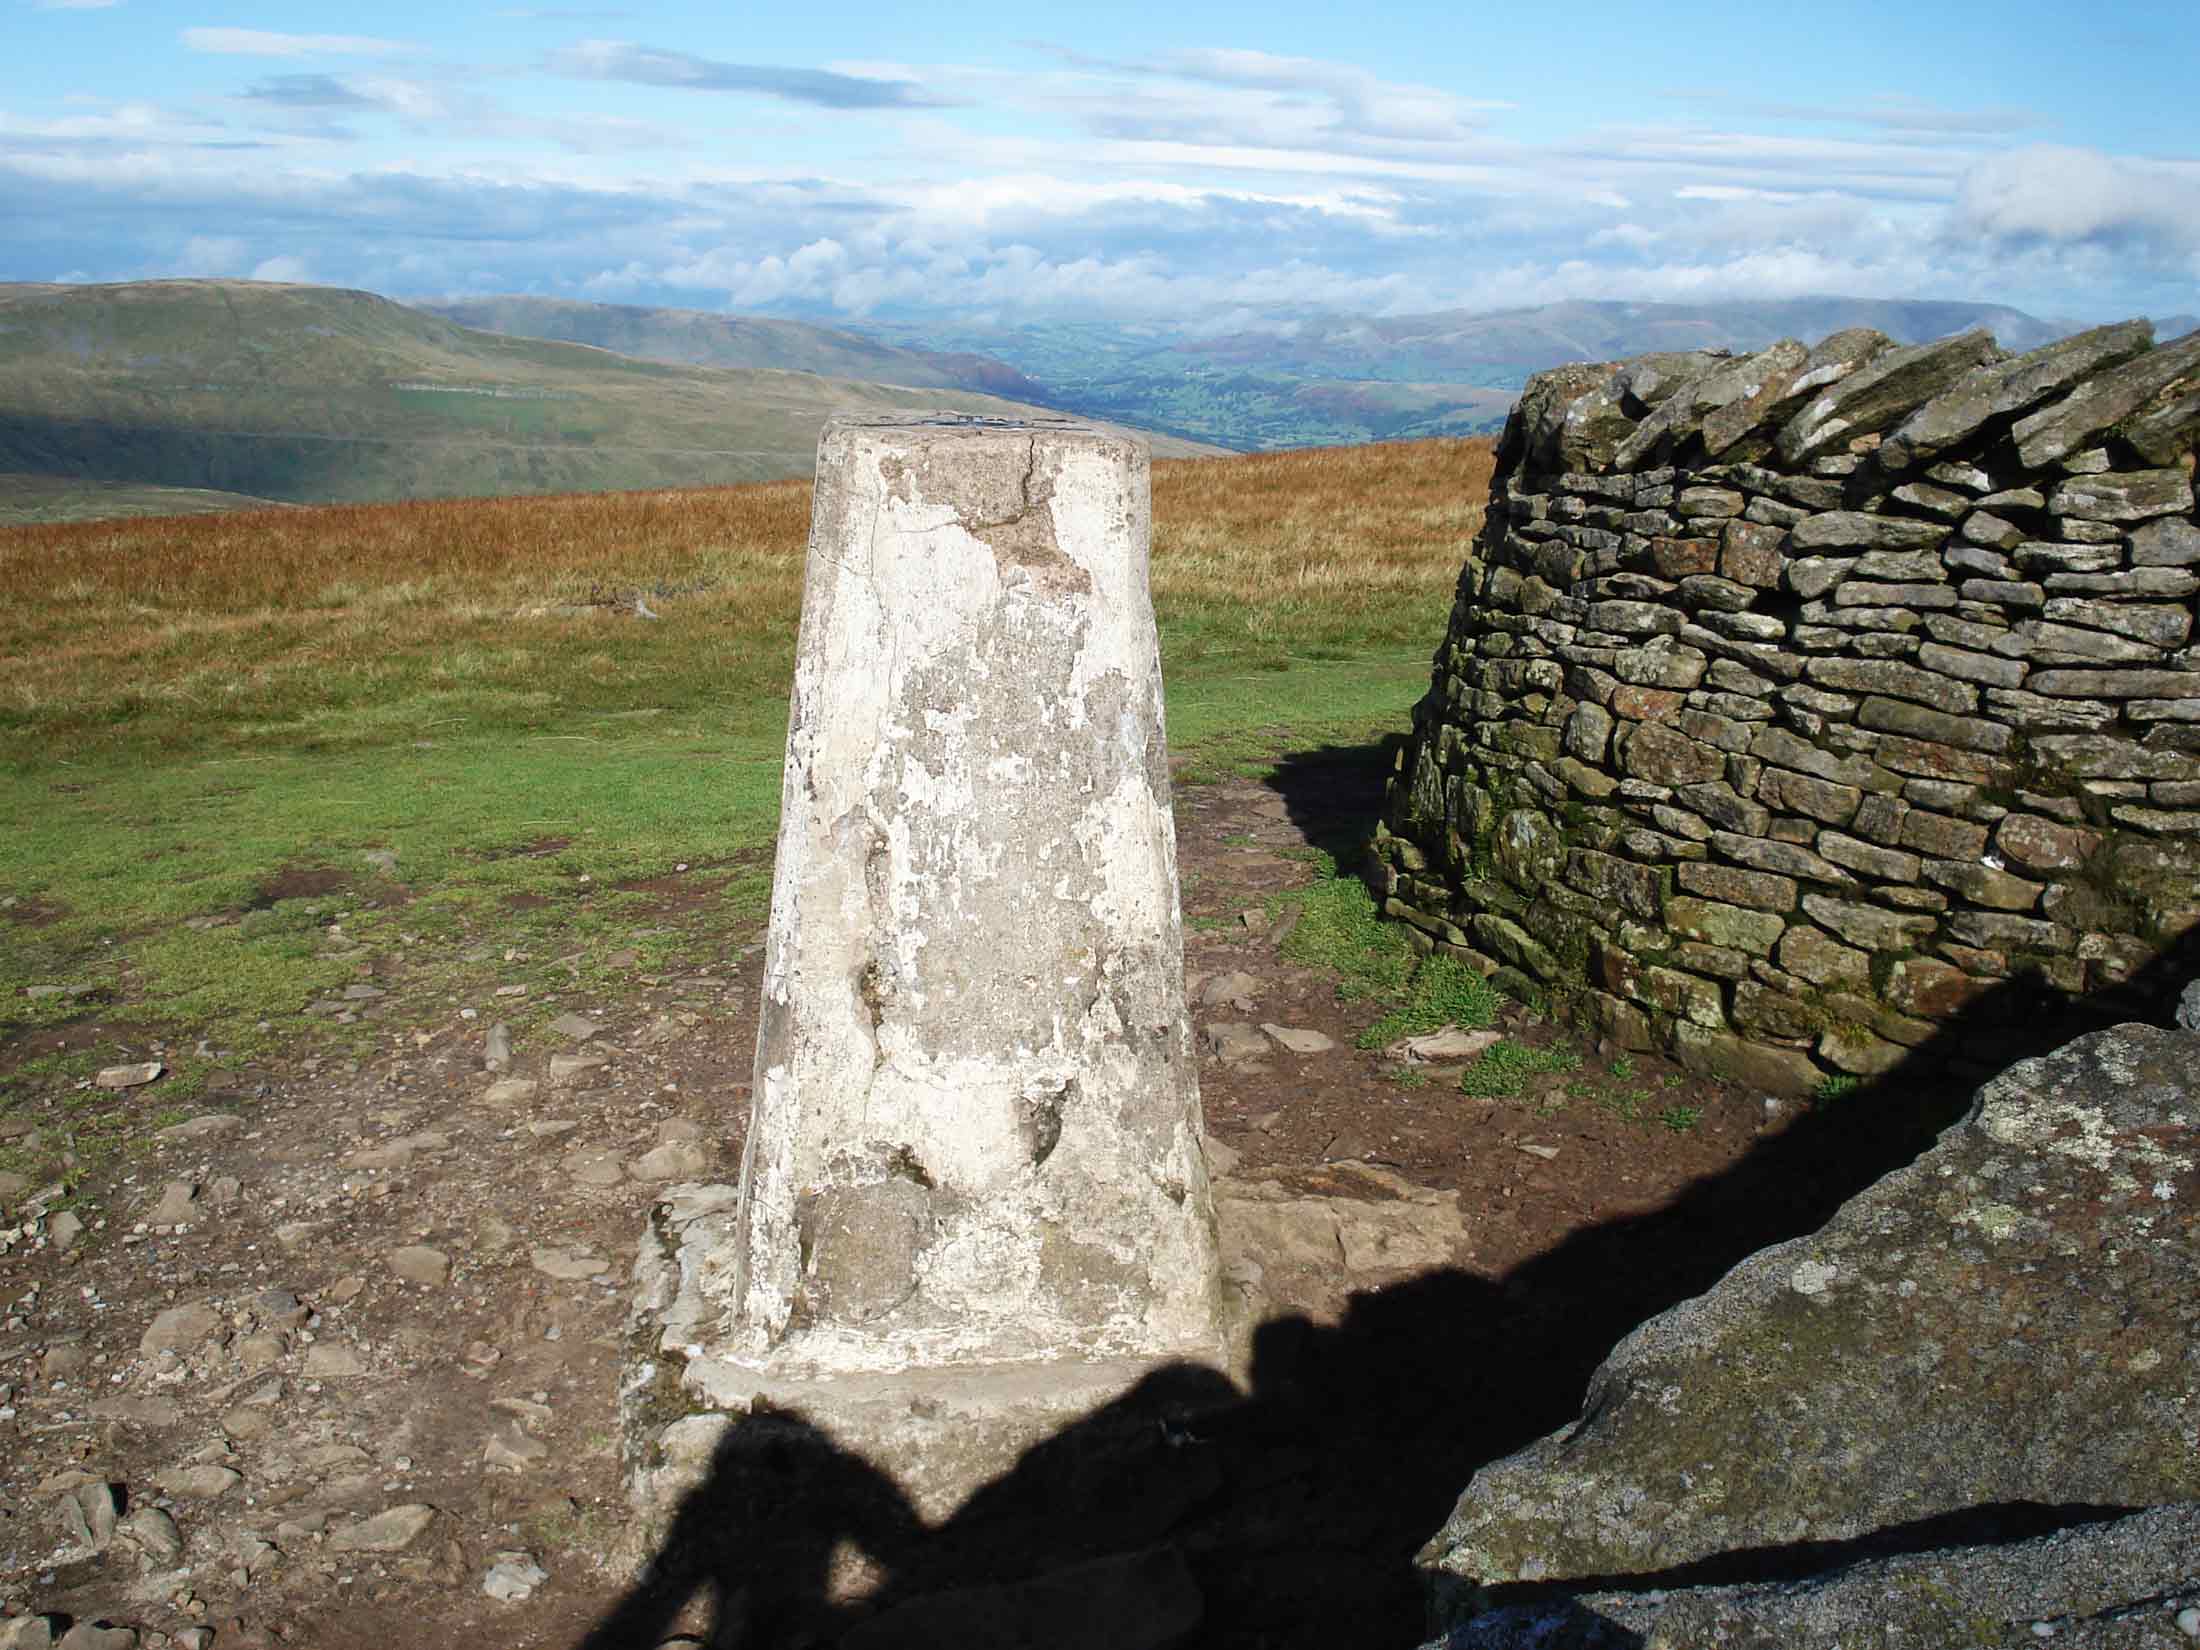 This trig point has the claim to fame for being the highest one in Yorkshire located on the summit of Whernside in the Yorkshire Dales